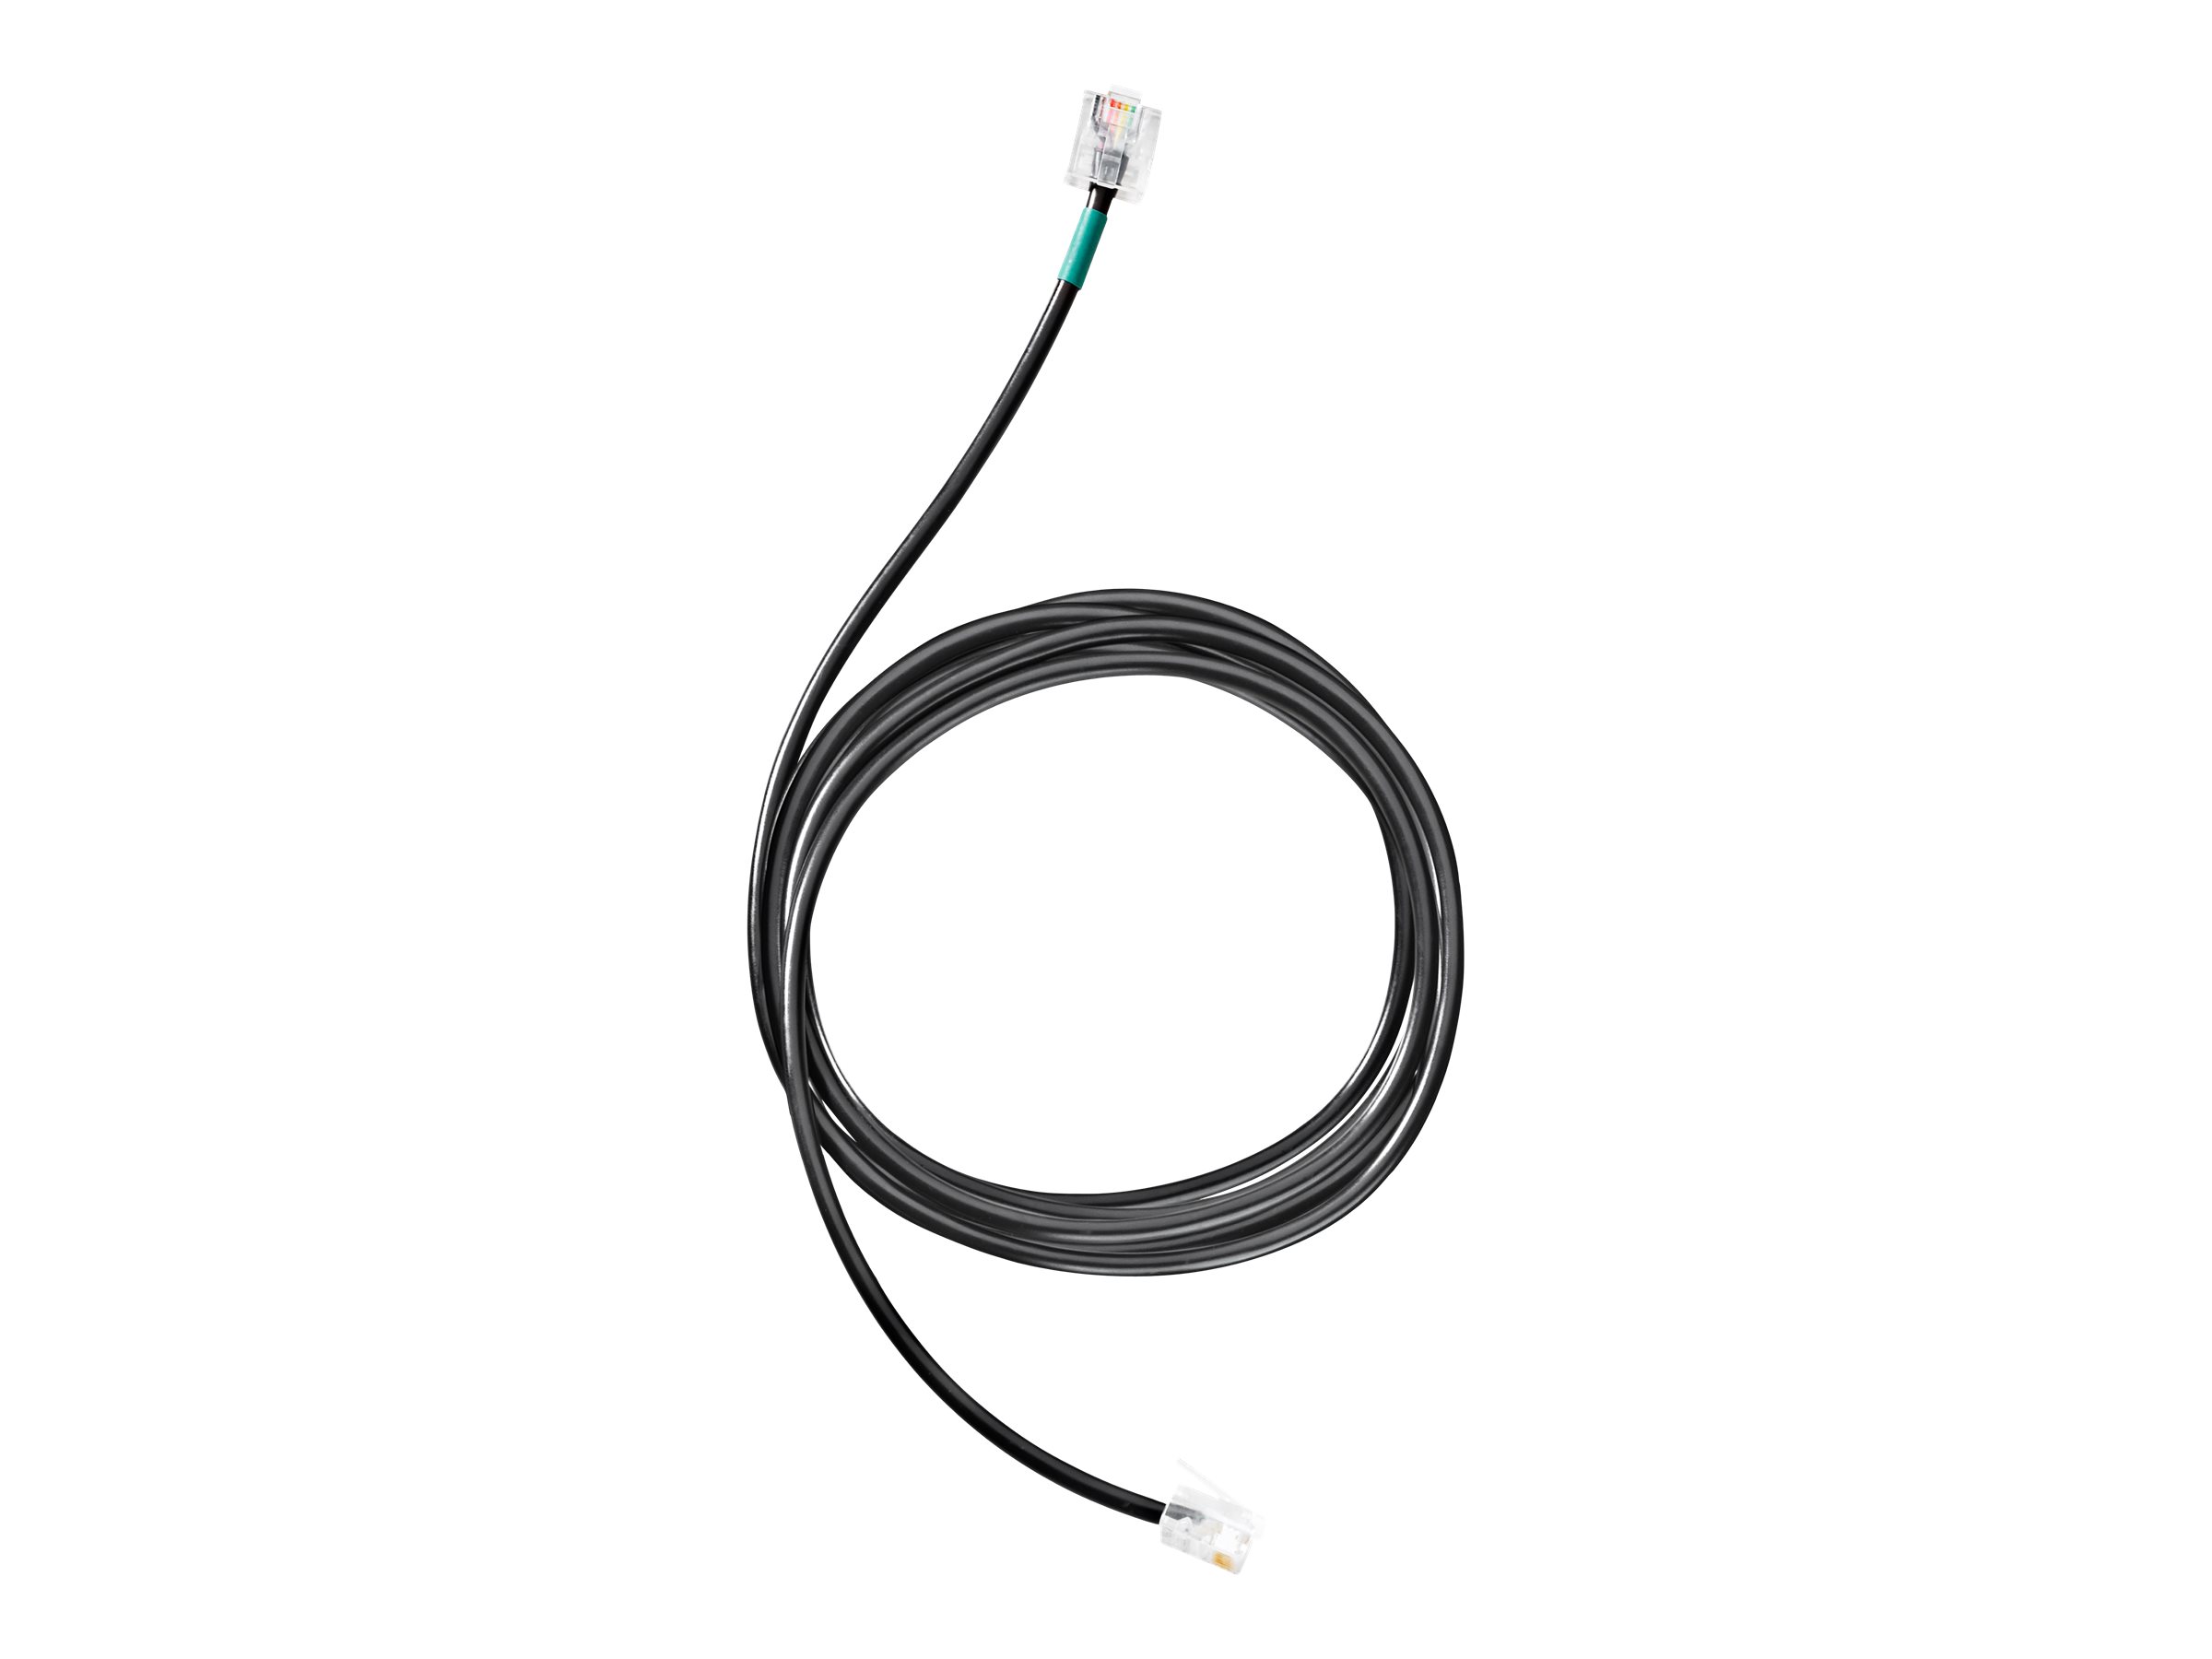 EPOS DHSG Cable for Elec. Hook Switch CEHS-DHSG - image 1 of 2